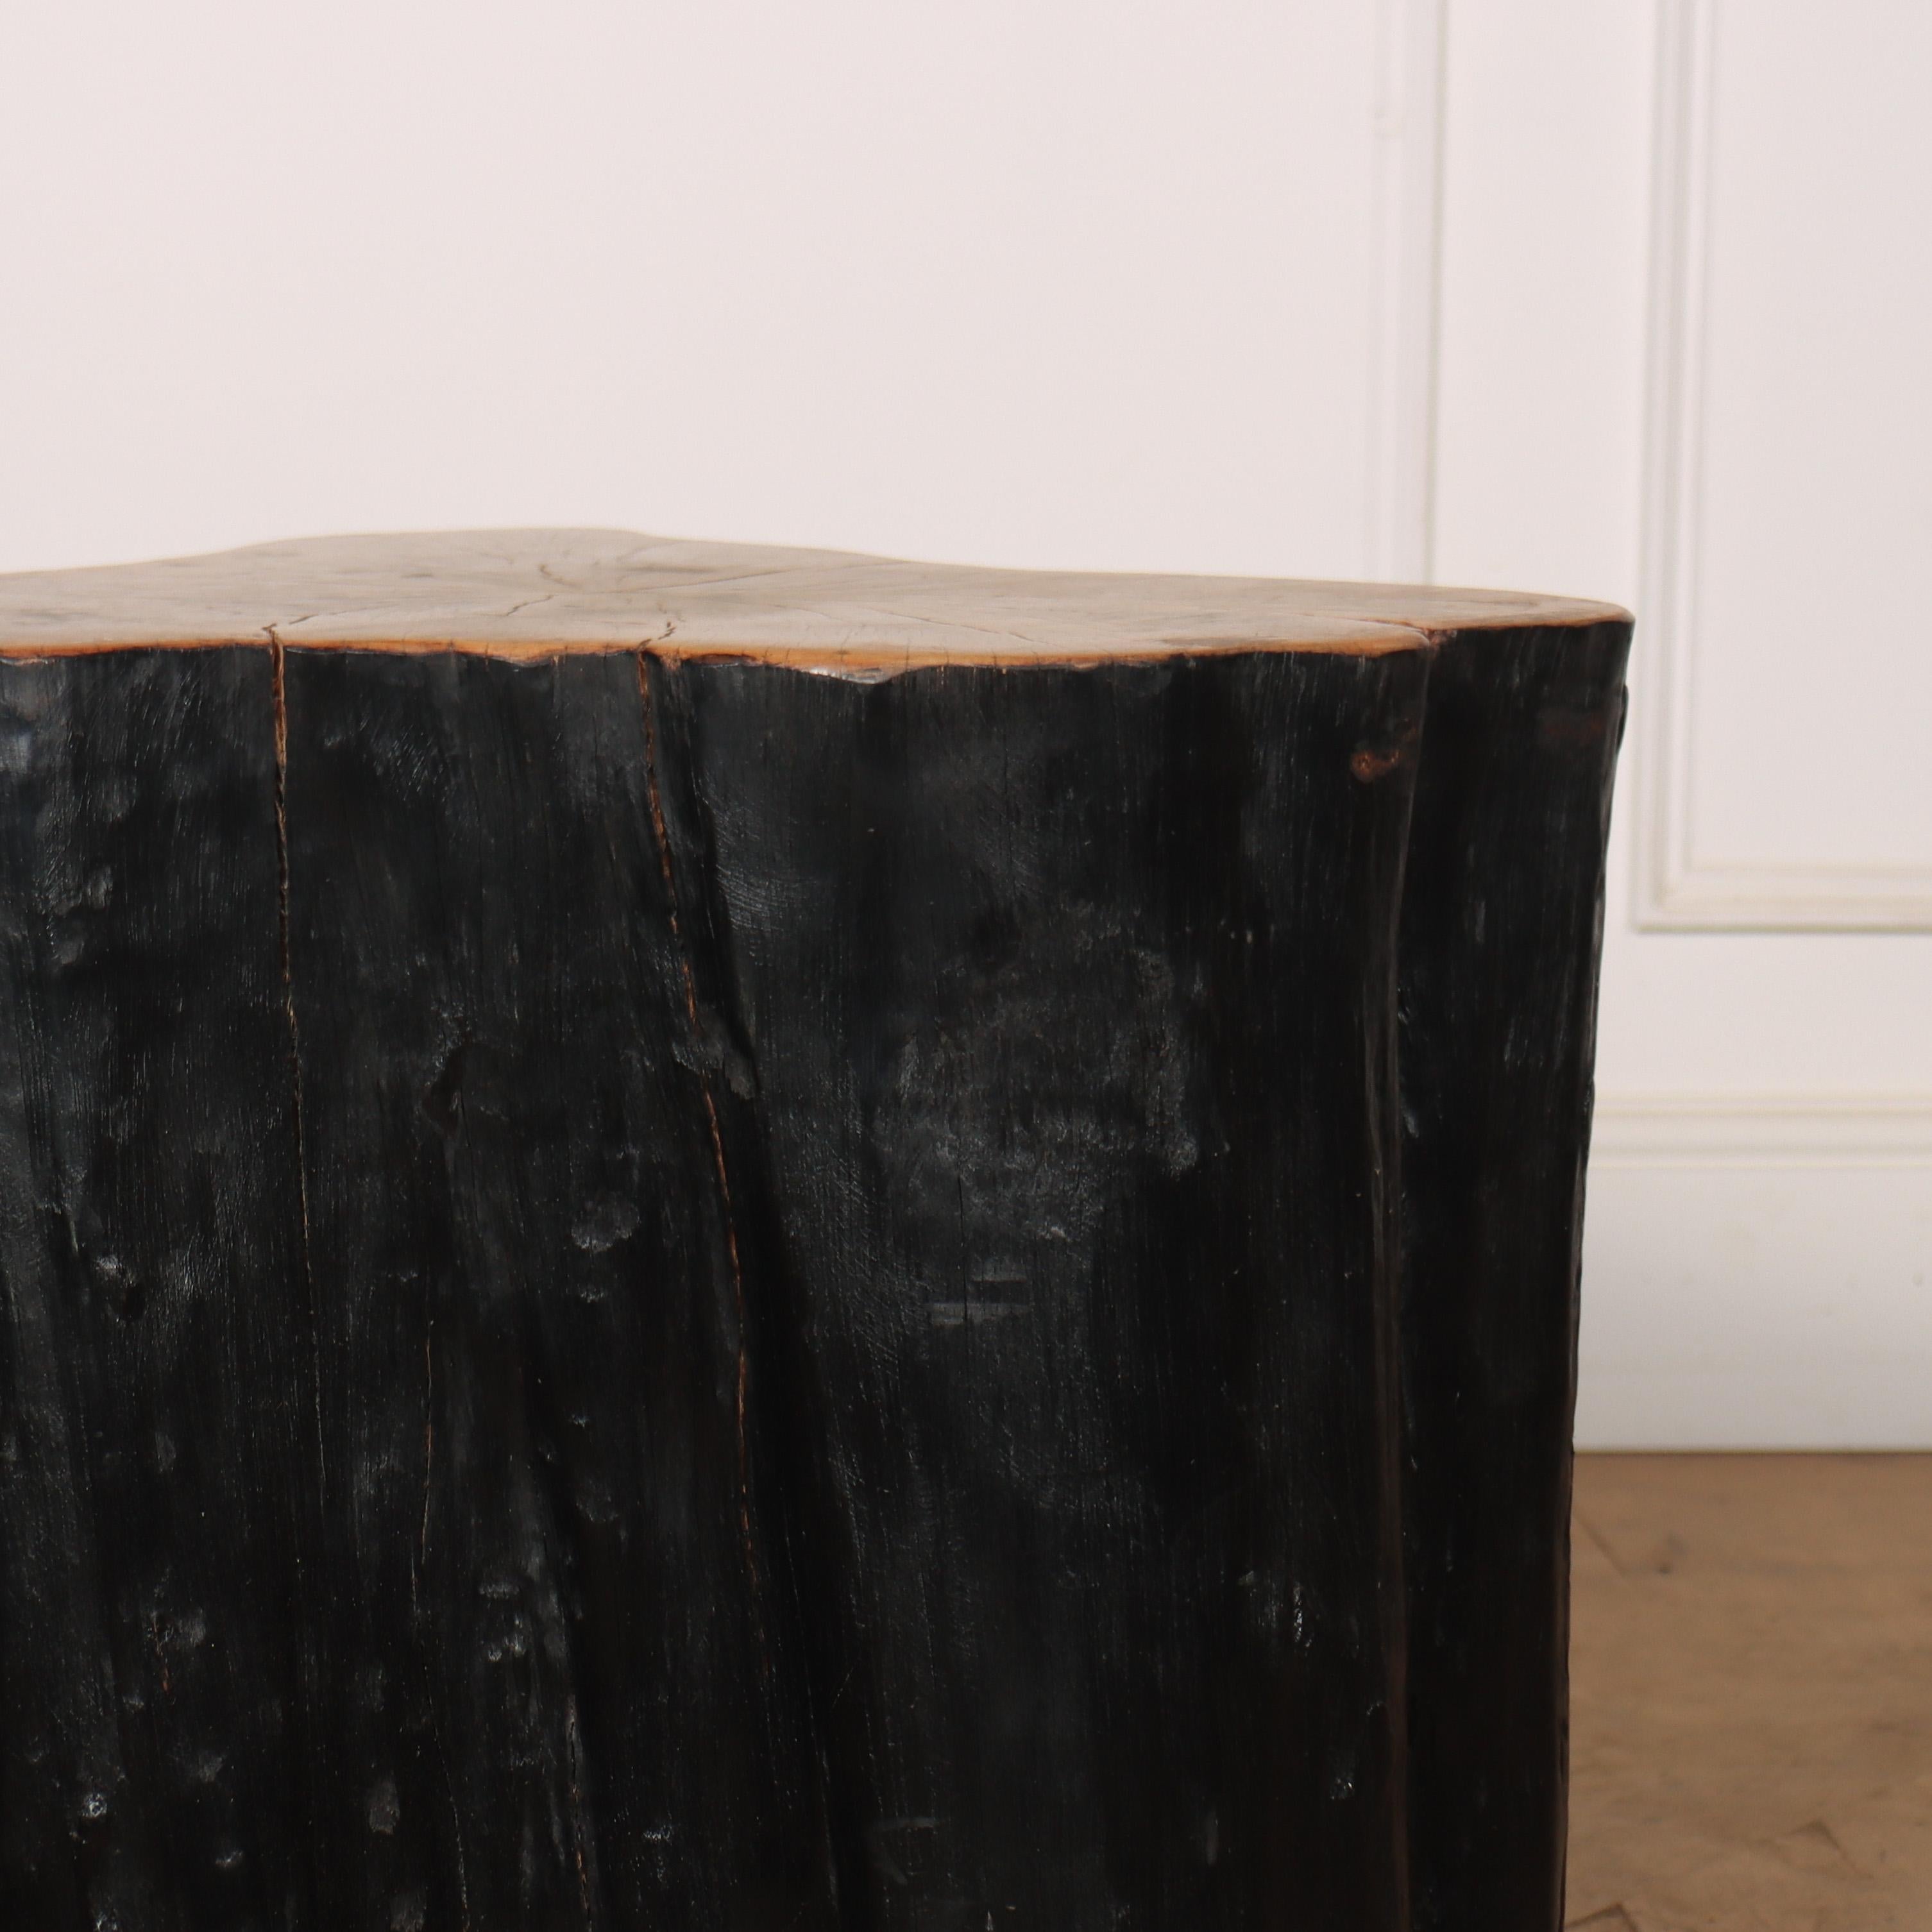 Primitive lychee side table. Hand carved and finished using a Japanese technique called Shou-Sugi Ban.

Reference: 8157

Dimensions
18 inches (46 cms) Wide
15 inches (38 cms) Deep
19.5 inches (50 cms) High